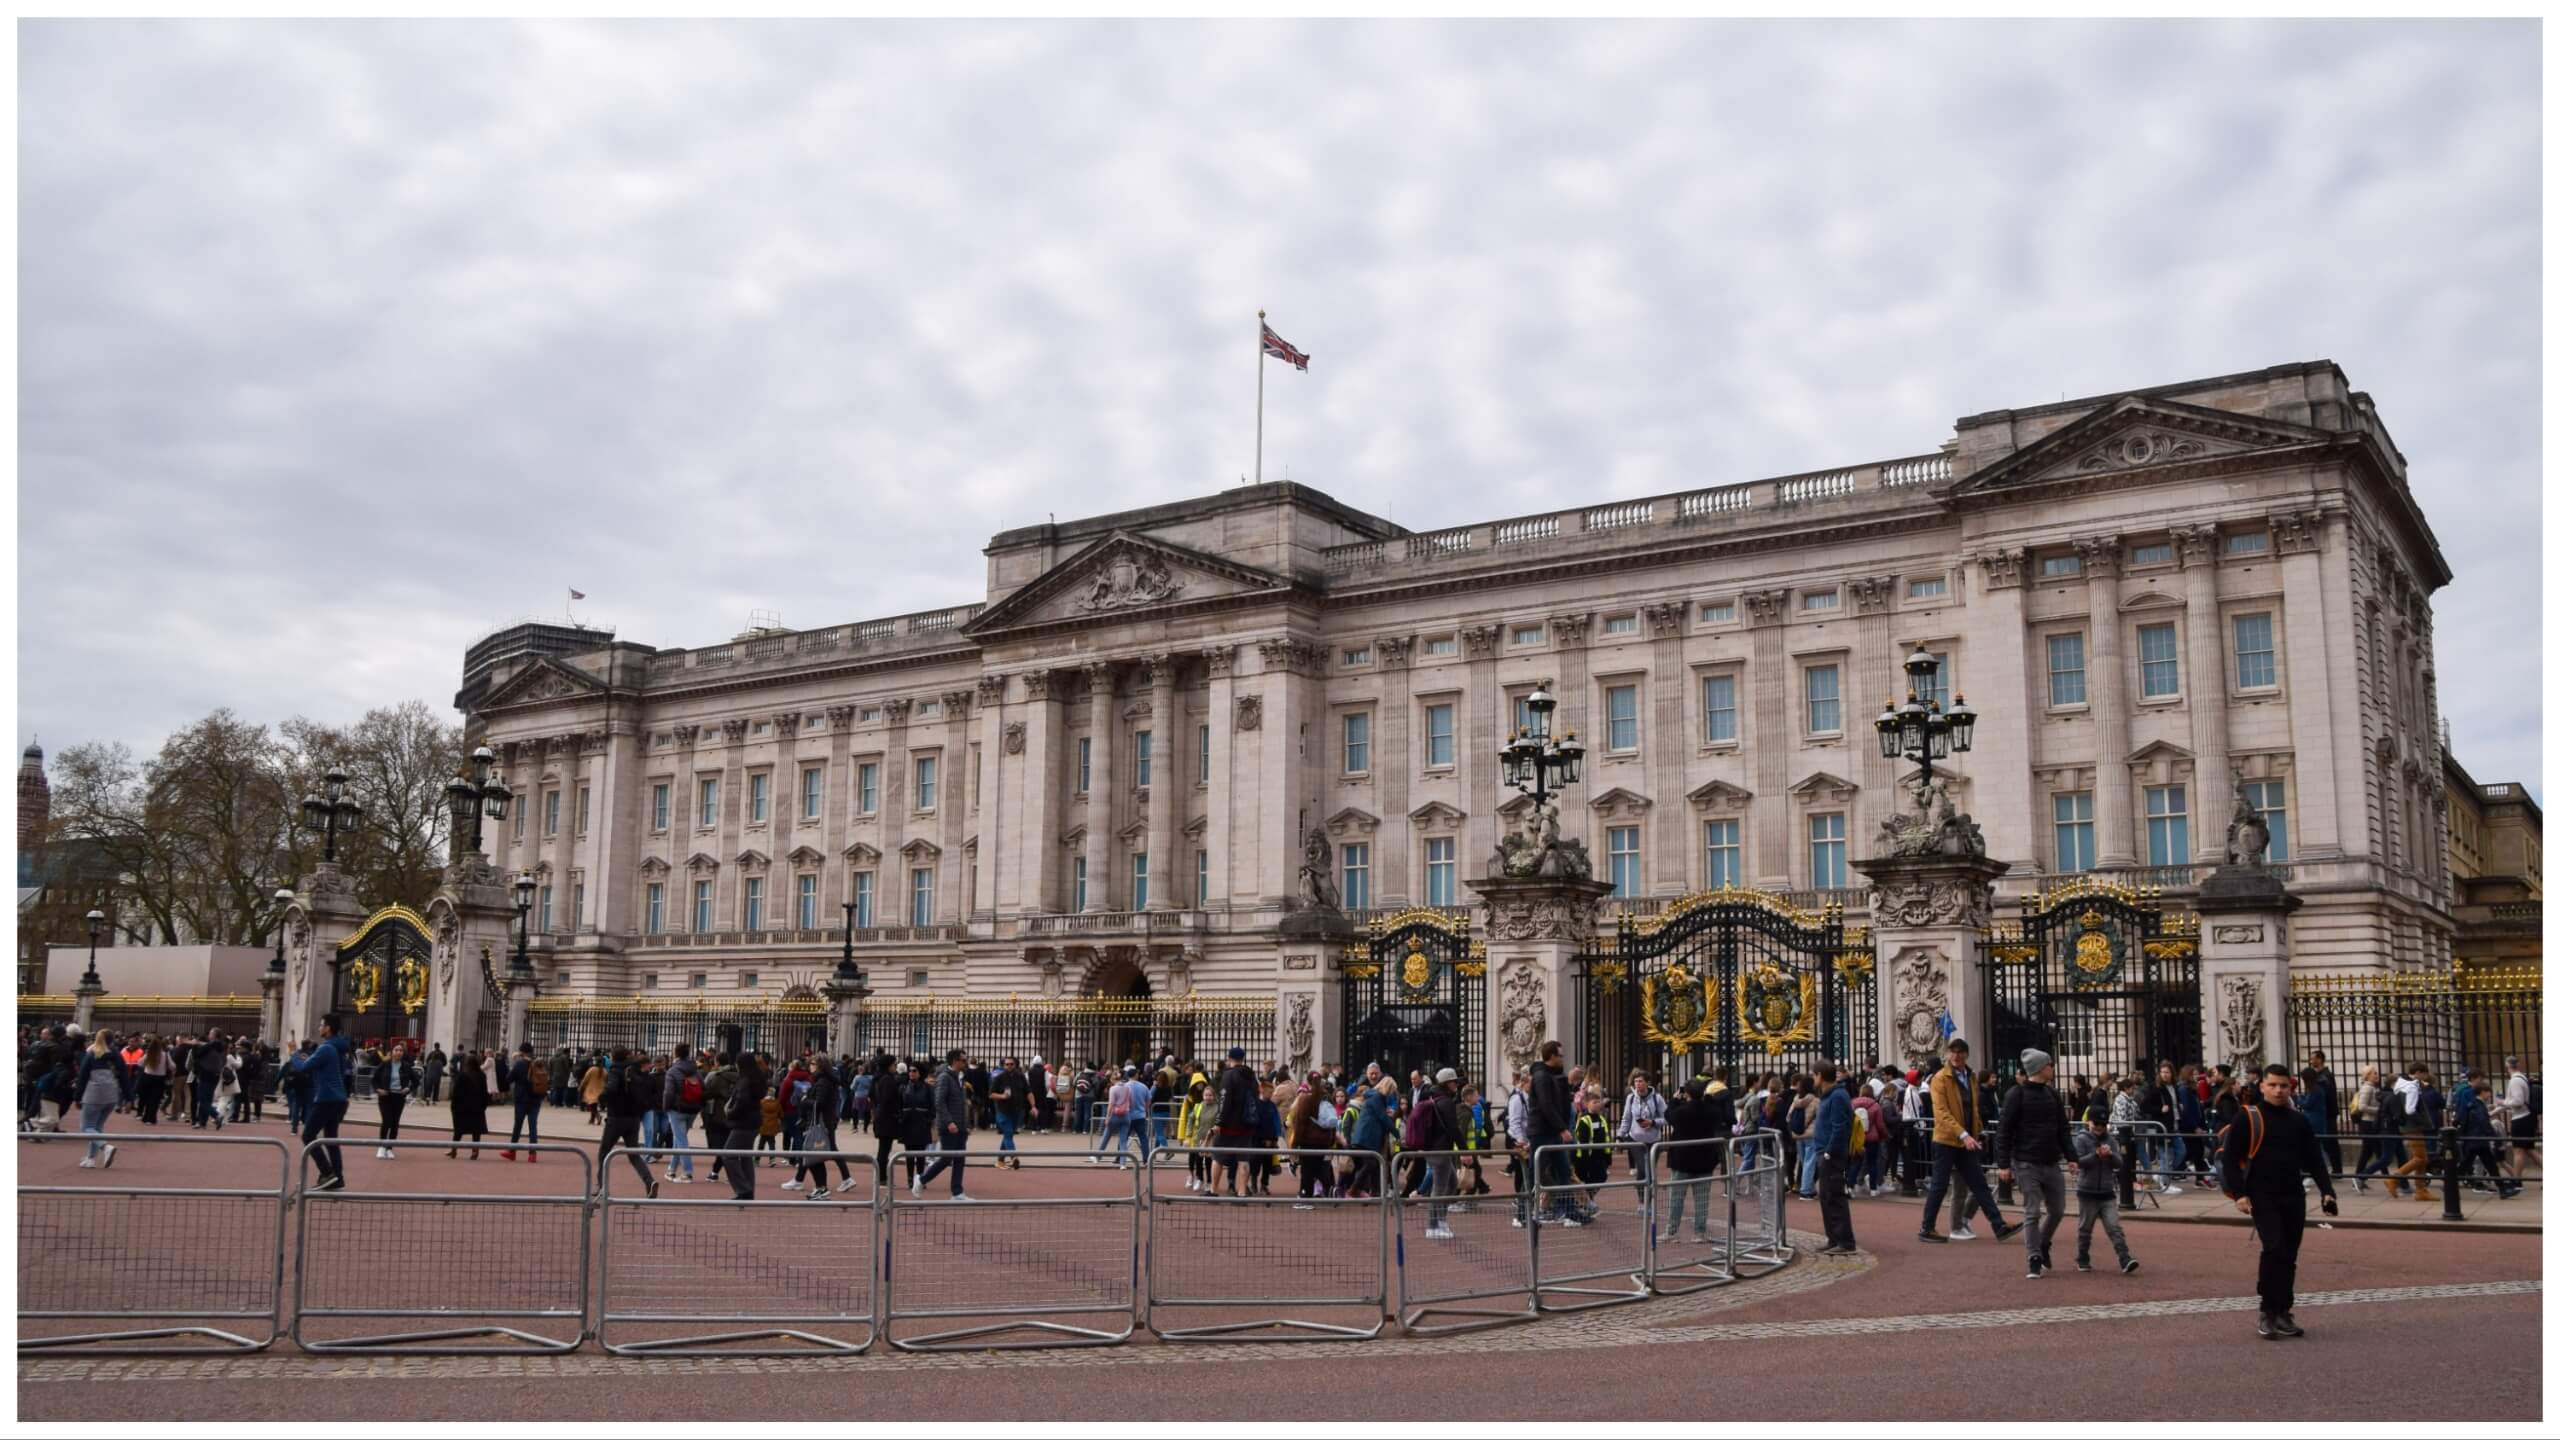 The exterior of Buckingham Palace in 2023.